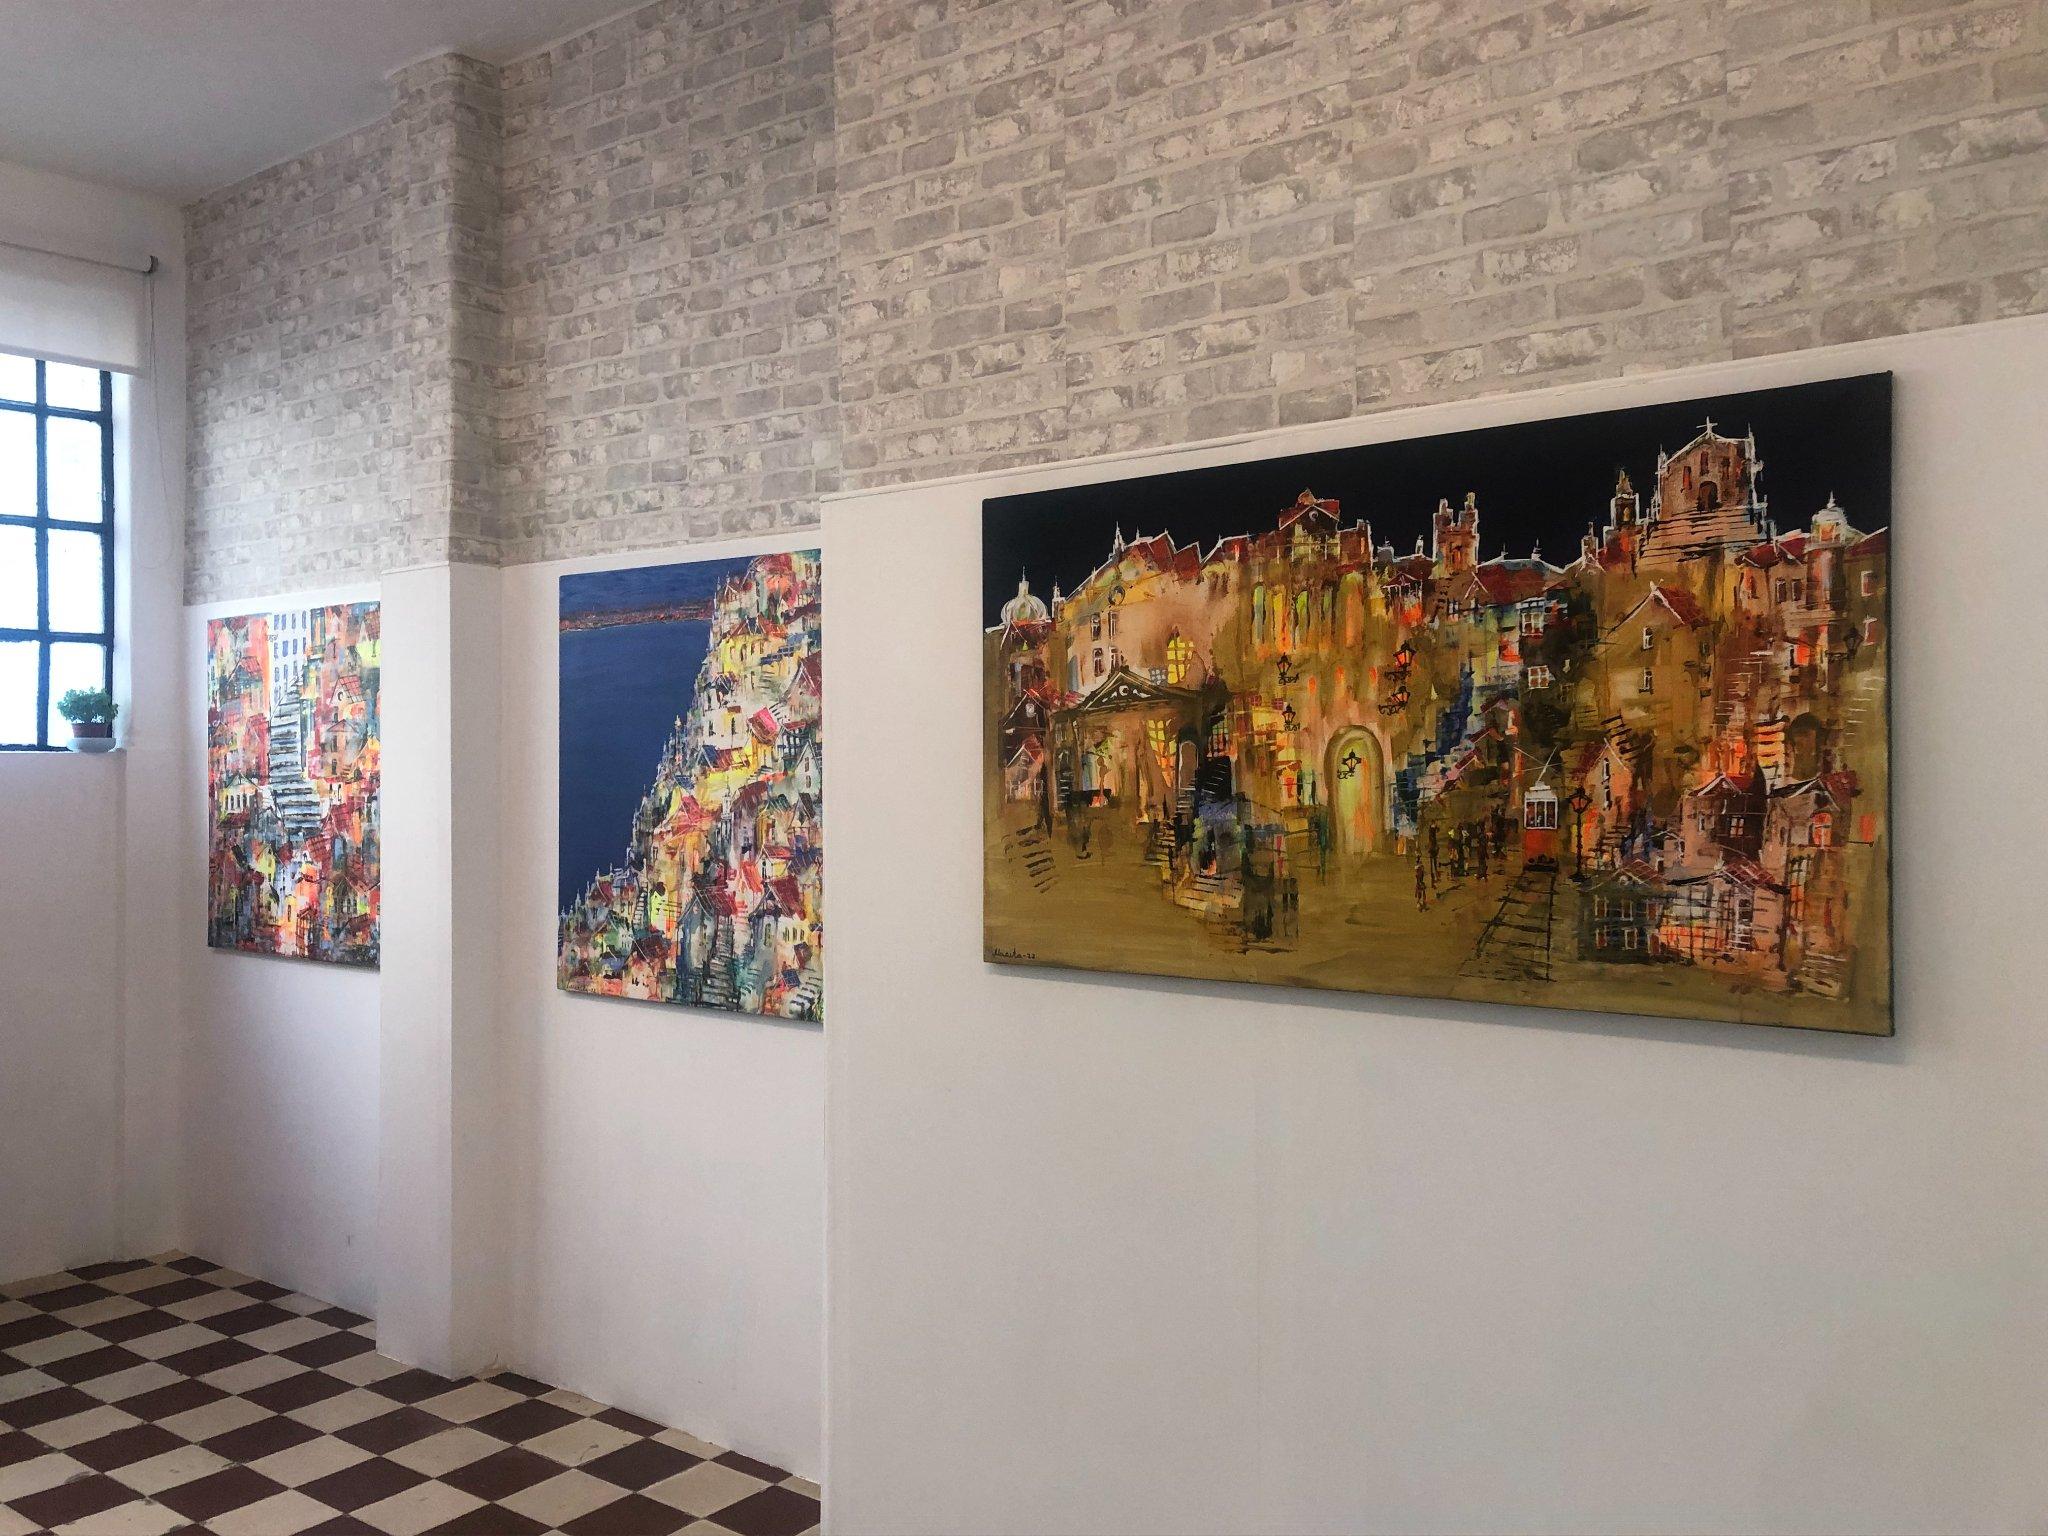 An exhibition of paintings by a Ukrainian artist was opened in Lisbon